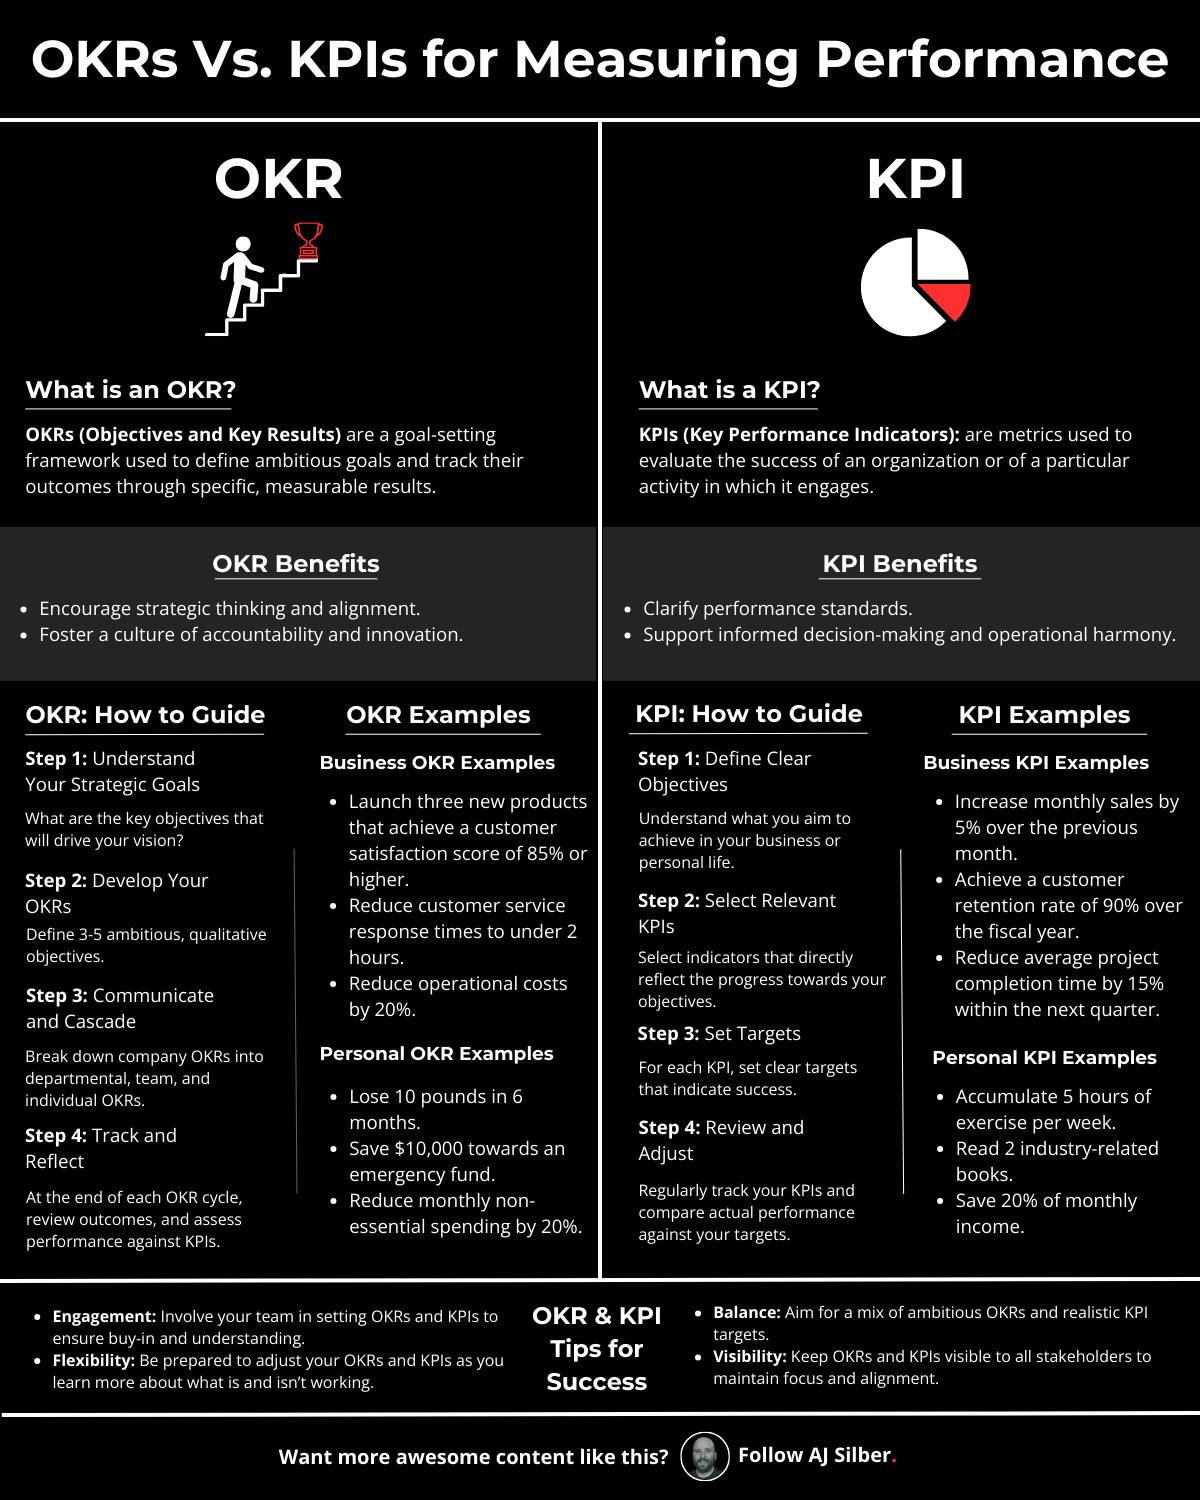 OKRs and KPIs for Goal Setting